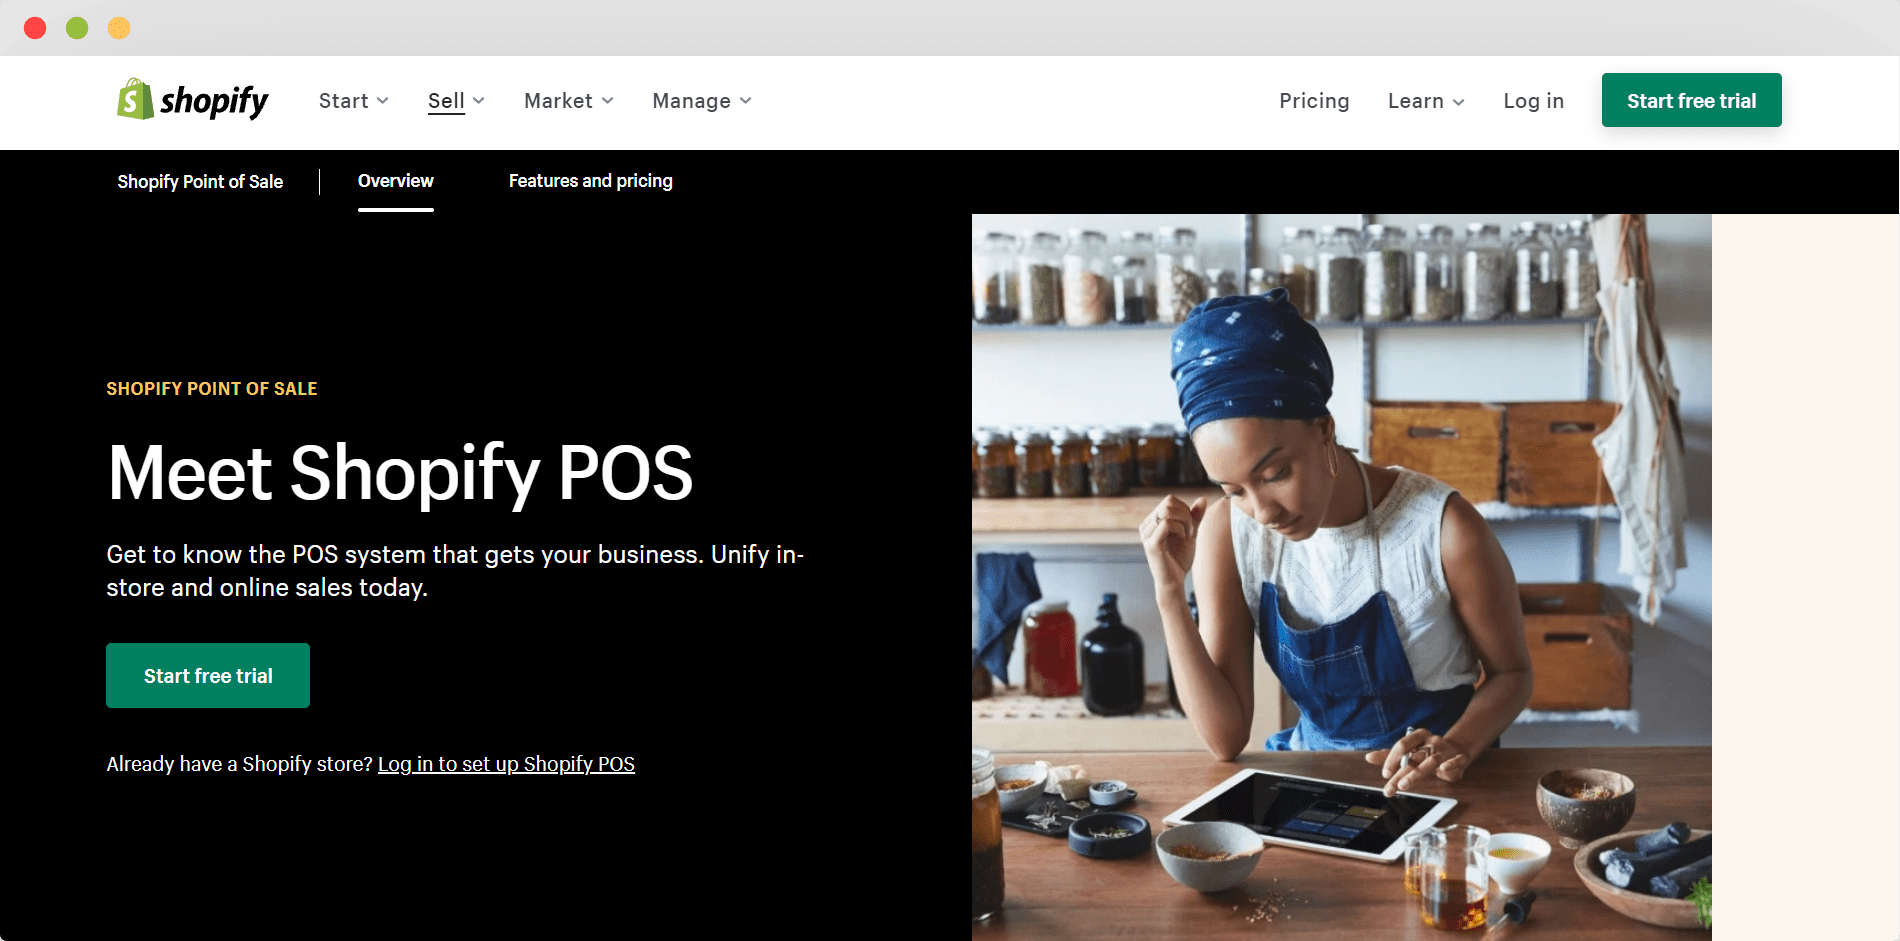 Shopify POS solutions